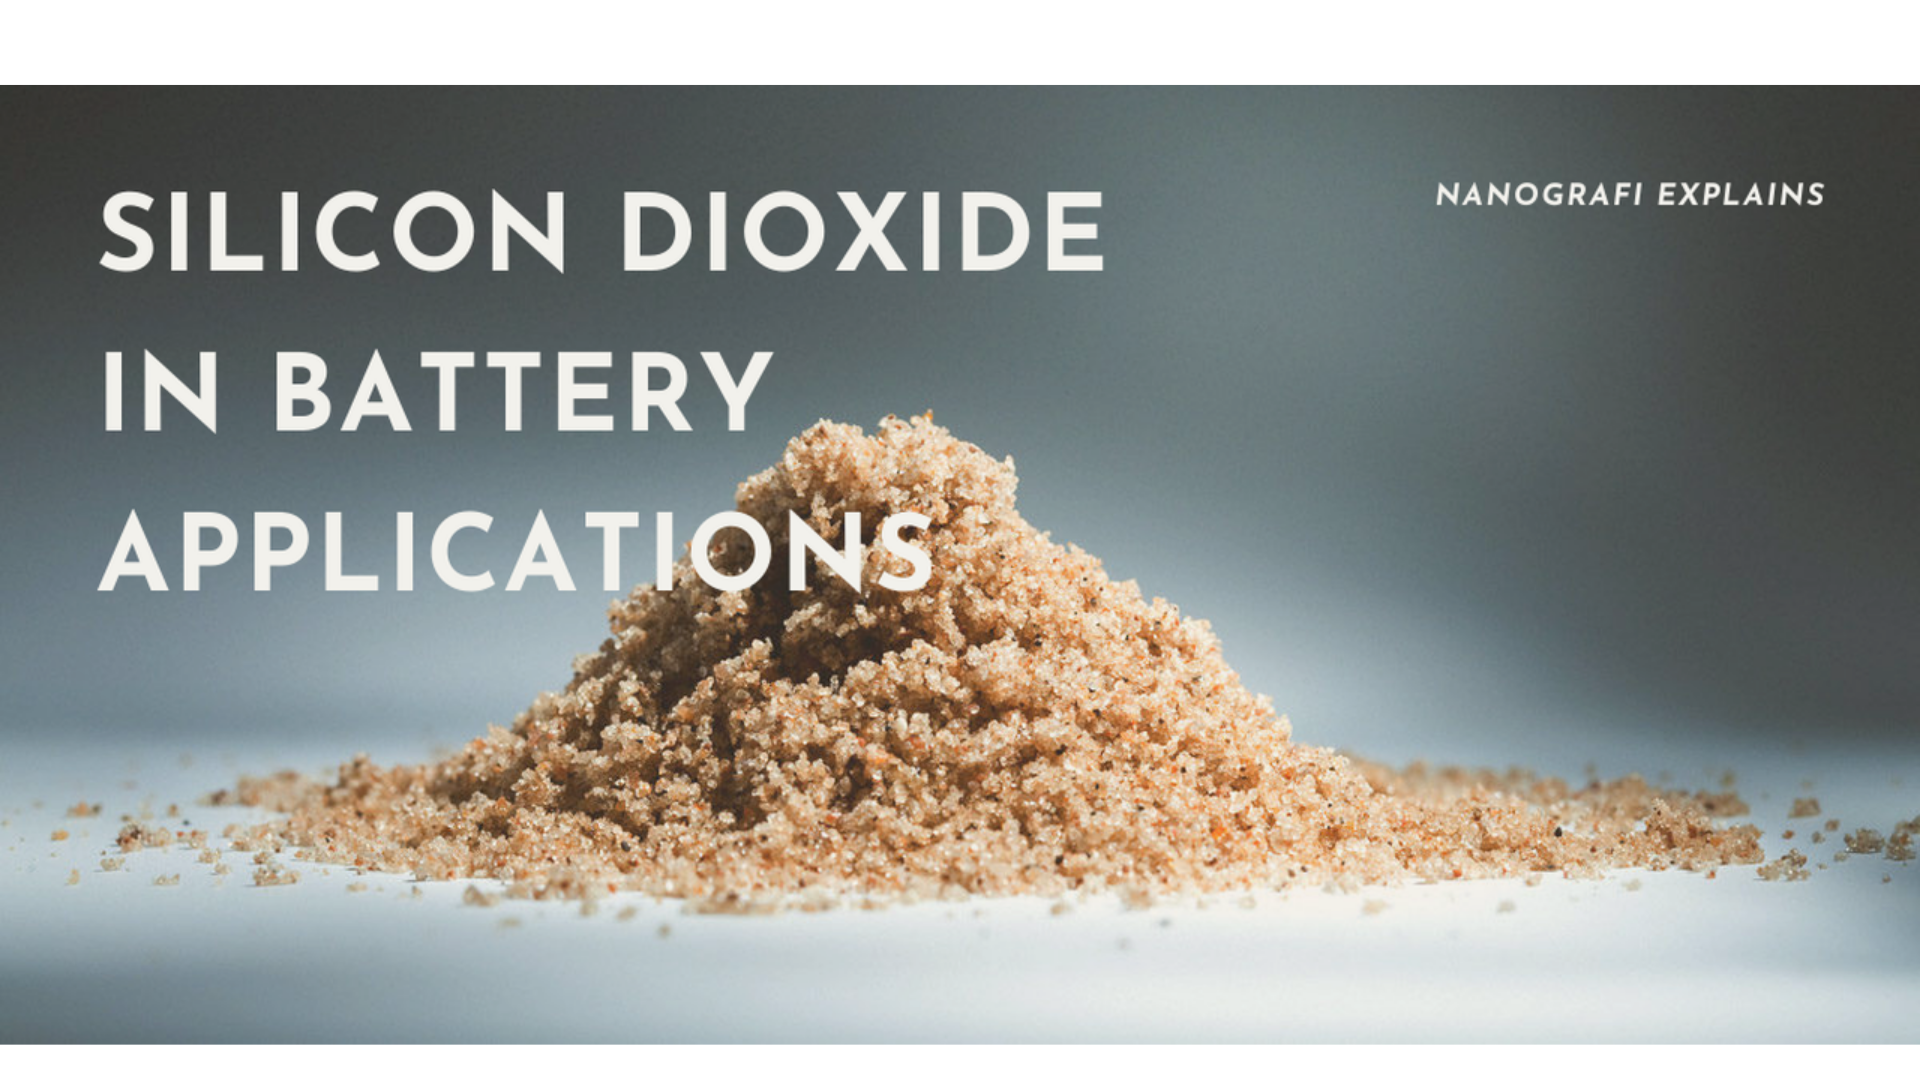 Silicon dioxide in battery applications